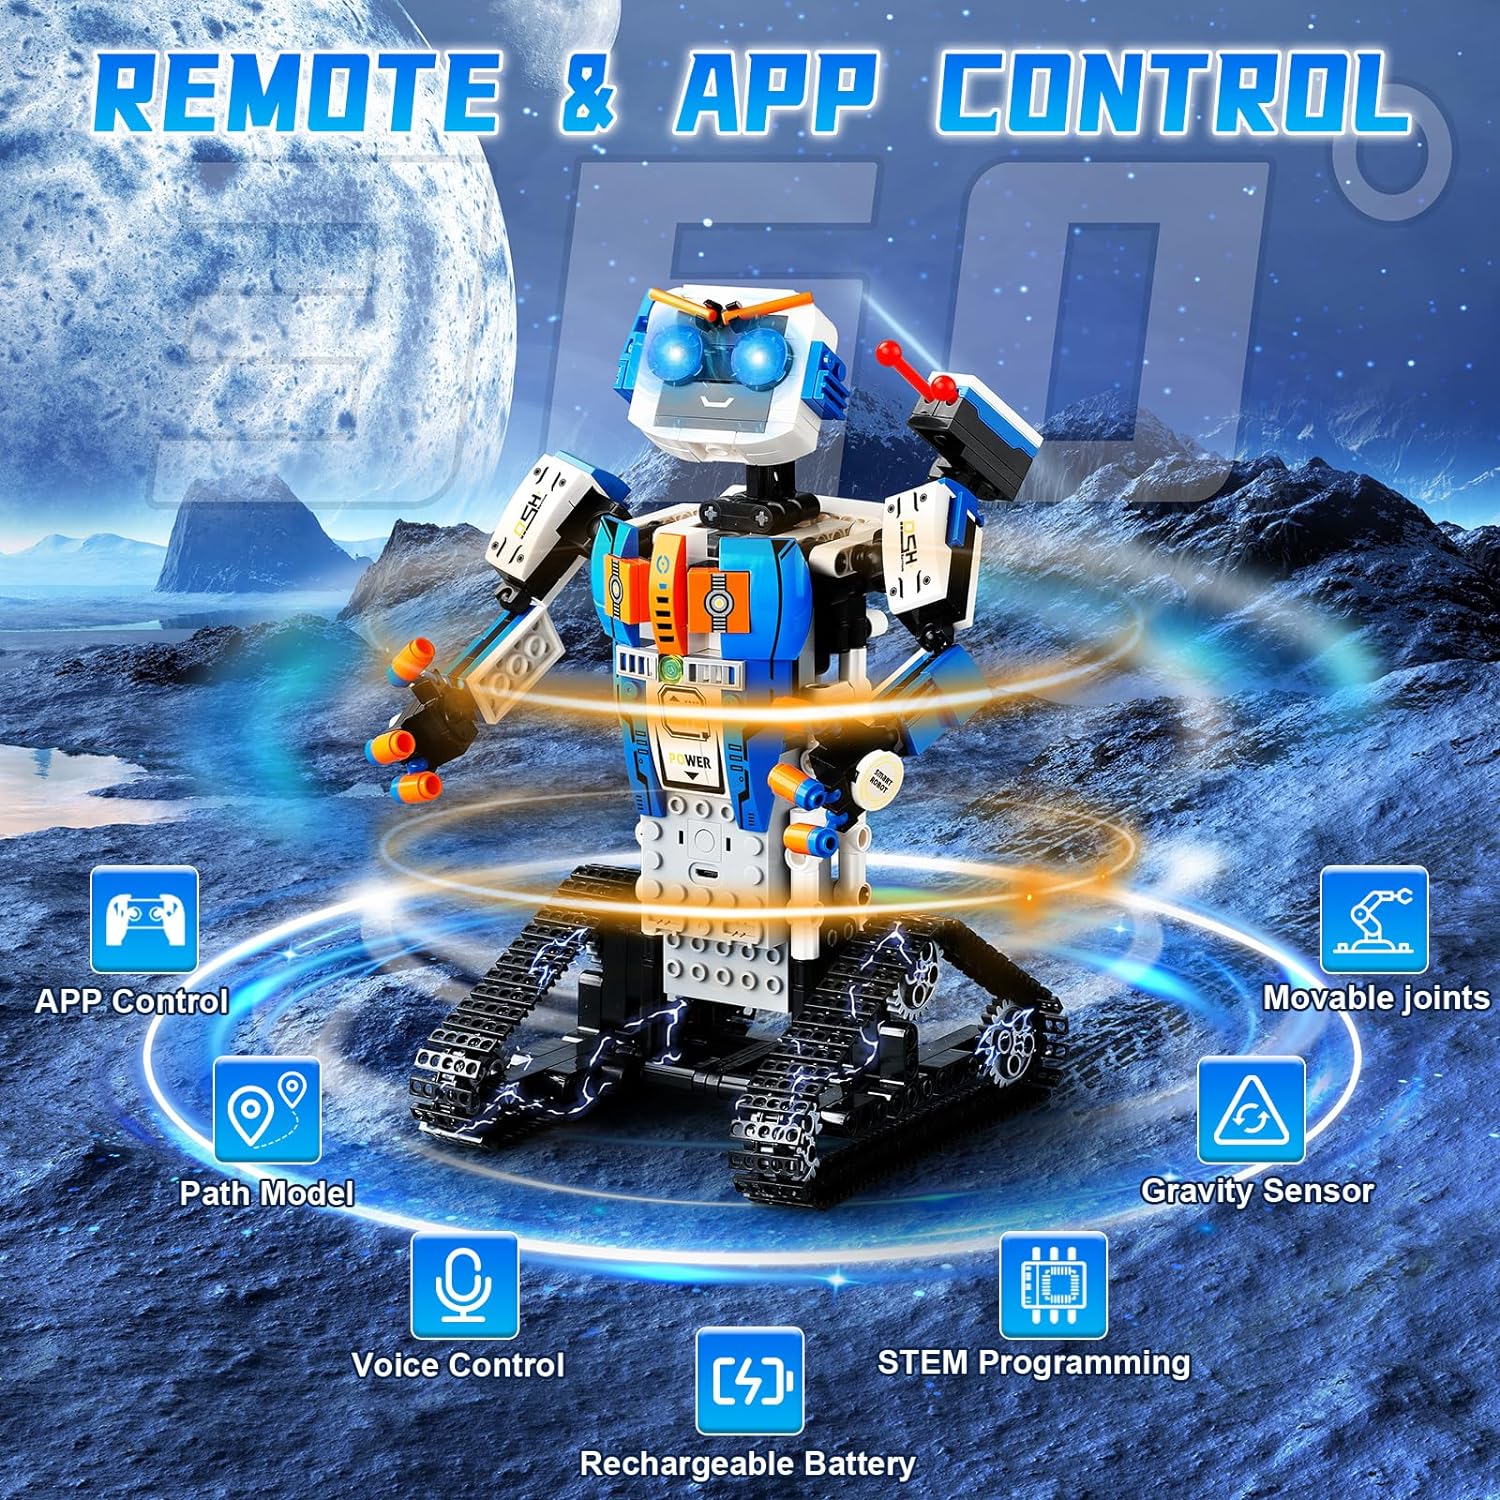 STEM Robot Building Kit: A Fun and Educational Review